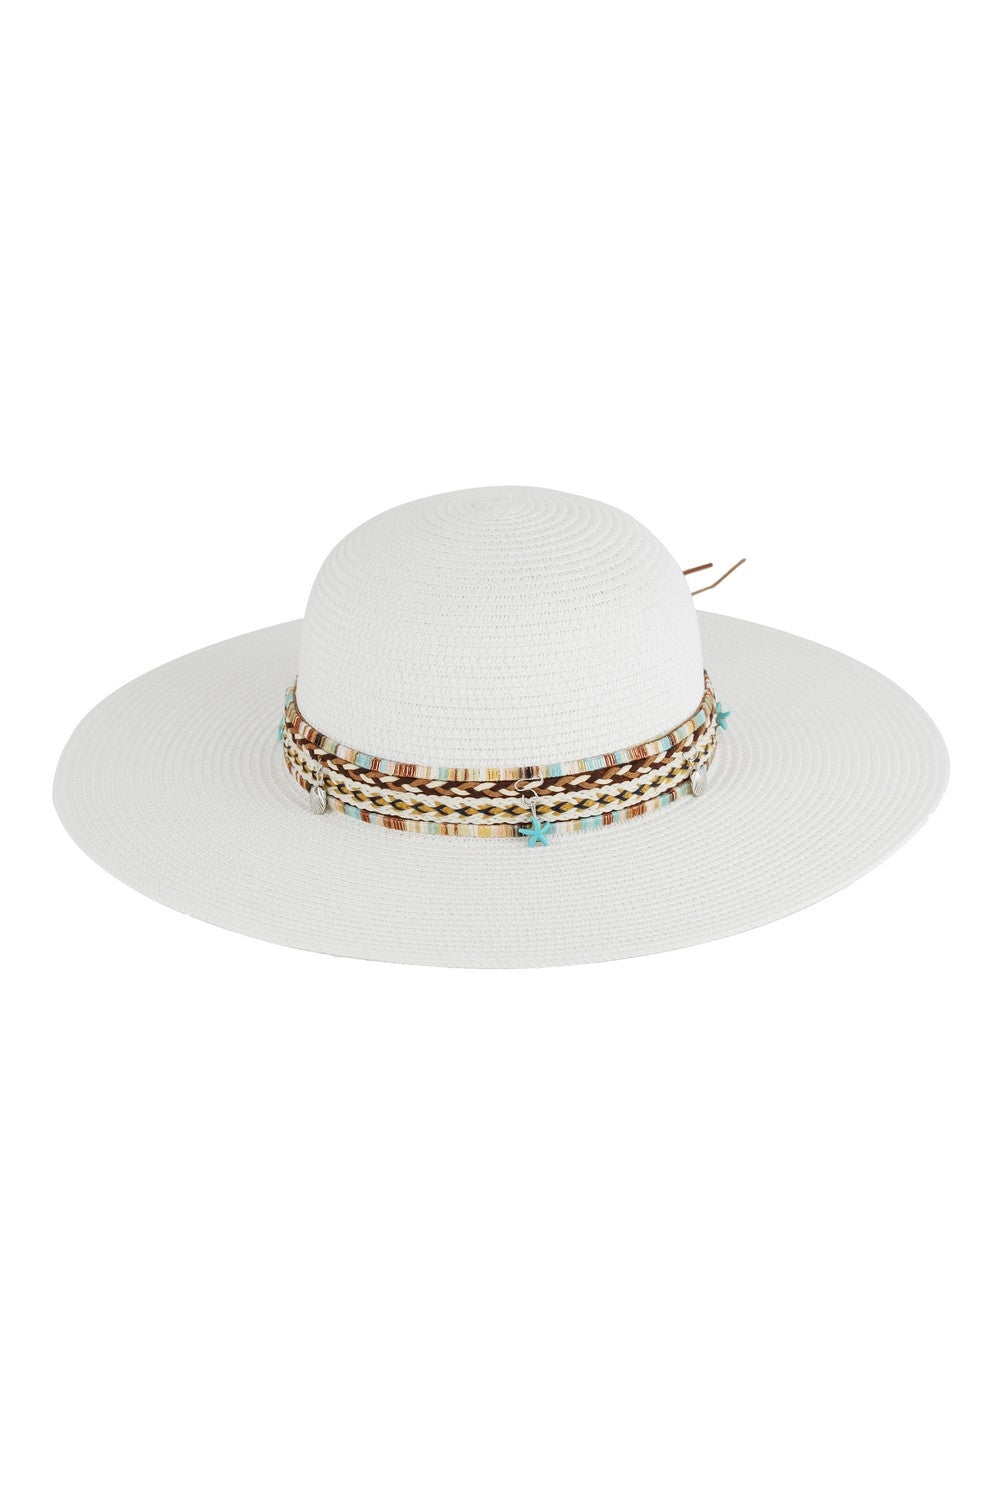 Floppy Straw Hat with Boho and Sealife Band White - Pack of 6